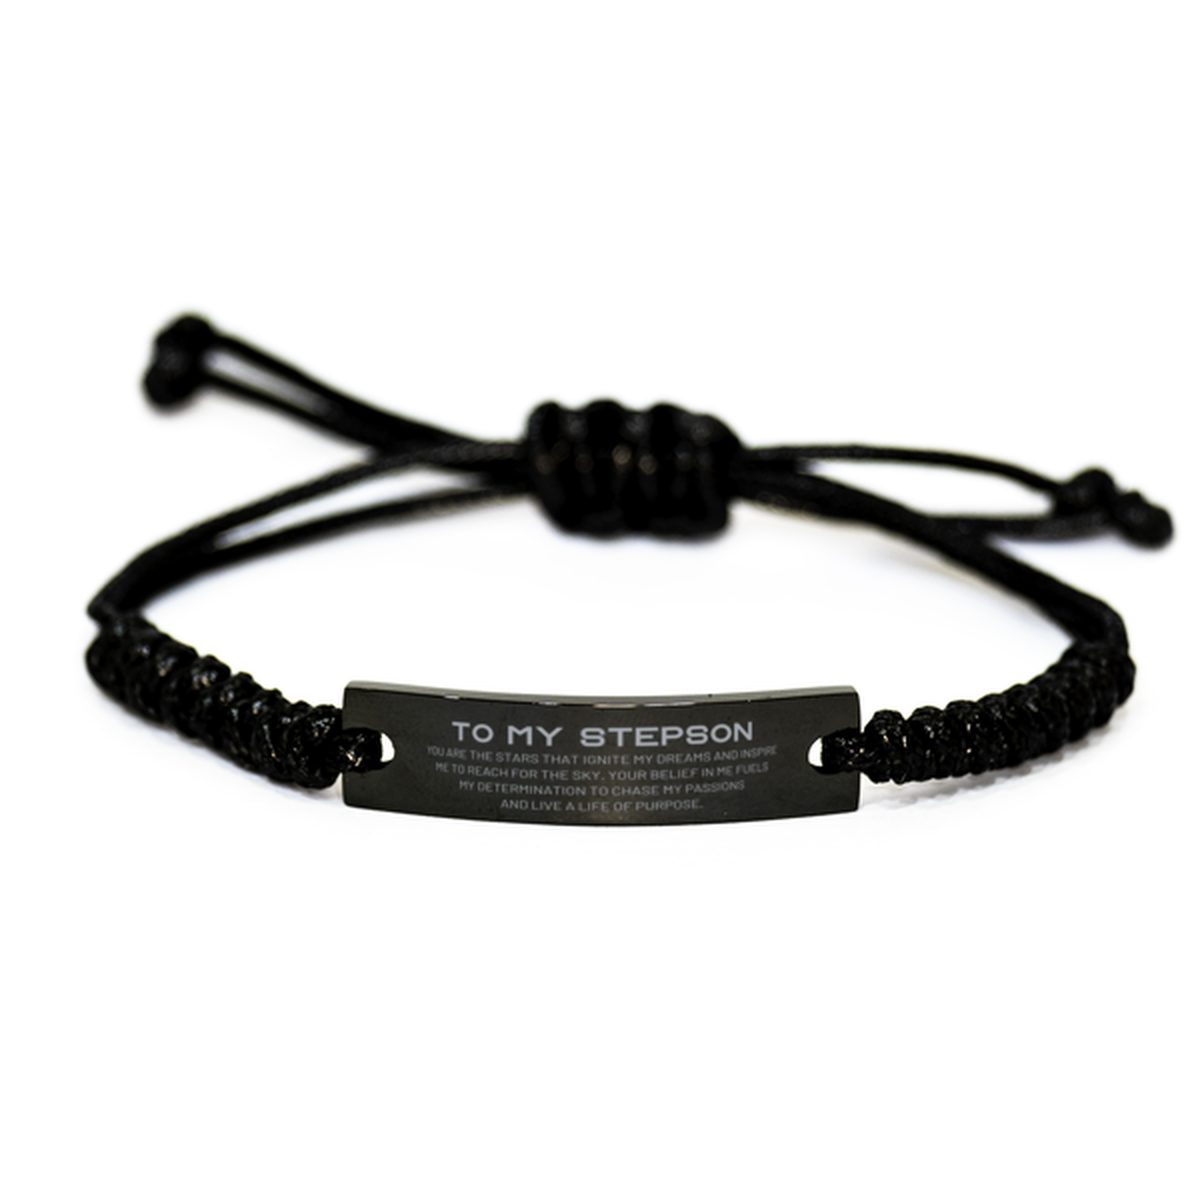 To My Stepson Black Rope Bracelet, You are the stars that ignite my dreams and inspire me to reach for the sky, Birthday Unique Gifts For Stepson, Thank You Gifts For Stepson